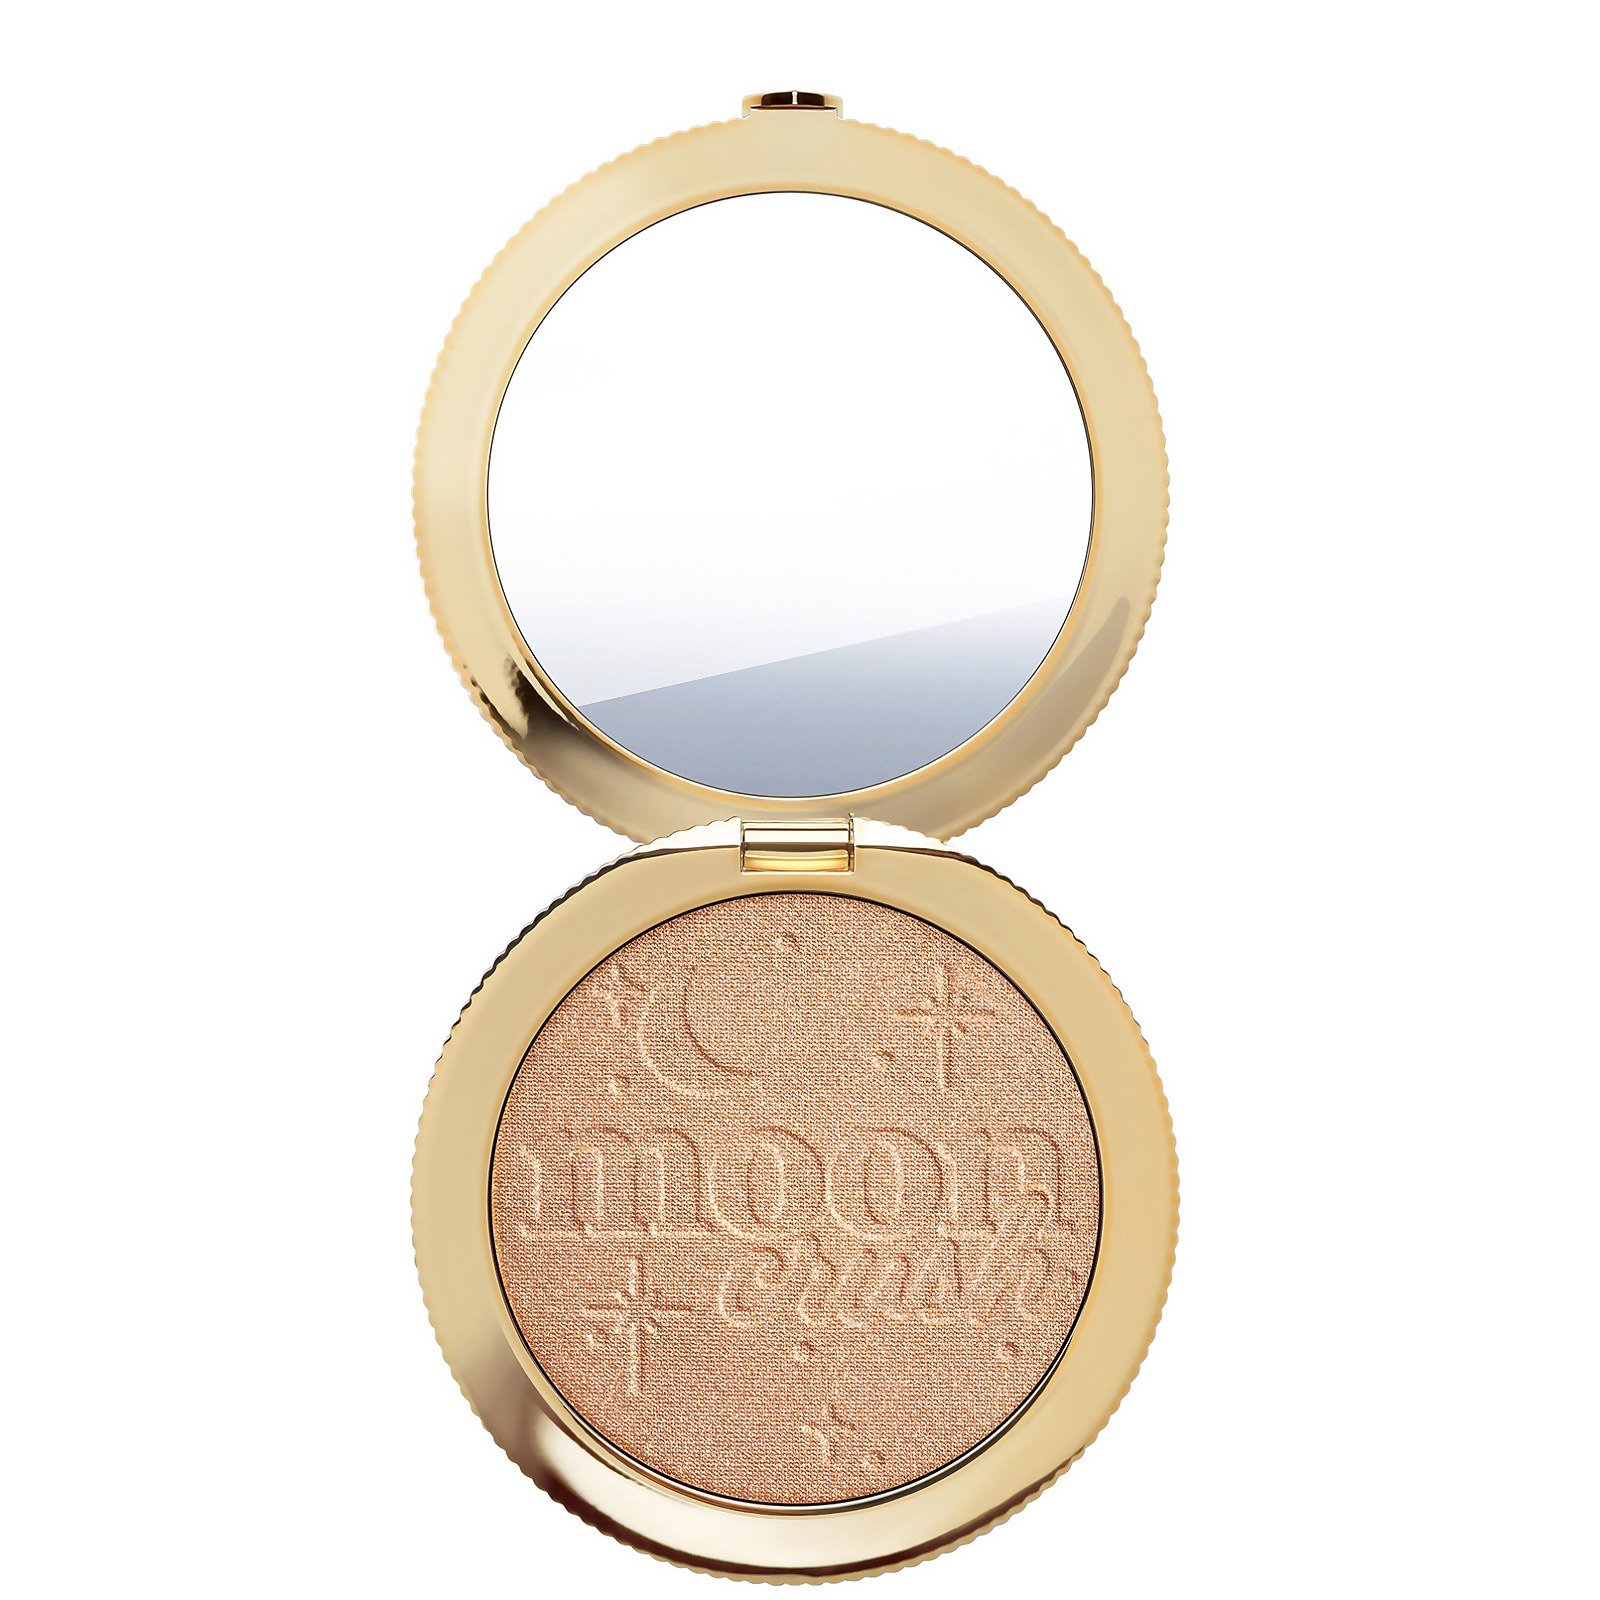 Image of Too Faced Moon Crush Highlighter - Summer Moon